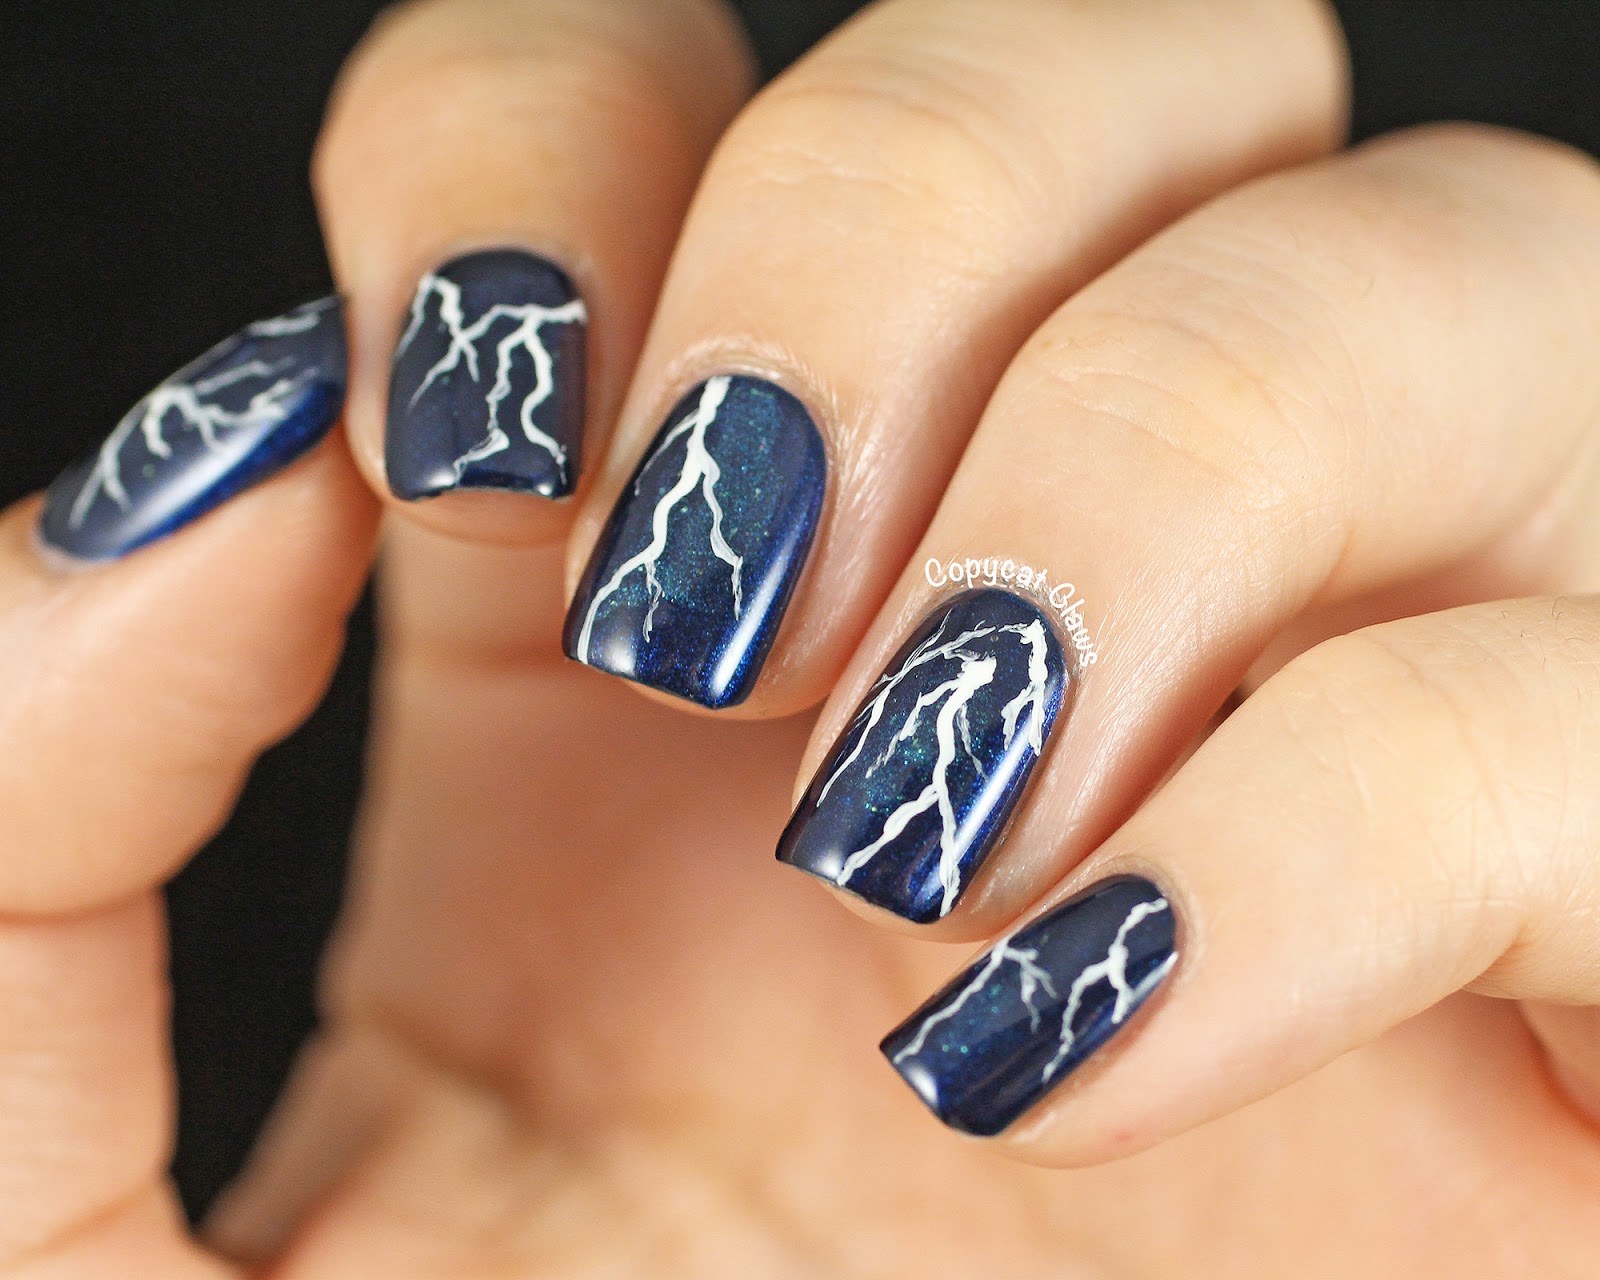 2. "Nail Art Designs with Lightning Bolts" - wide 1